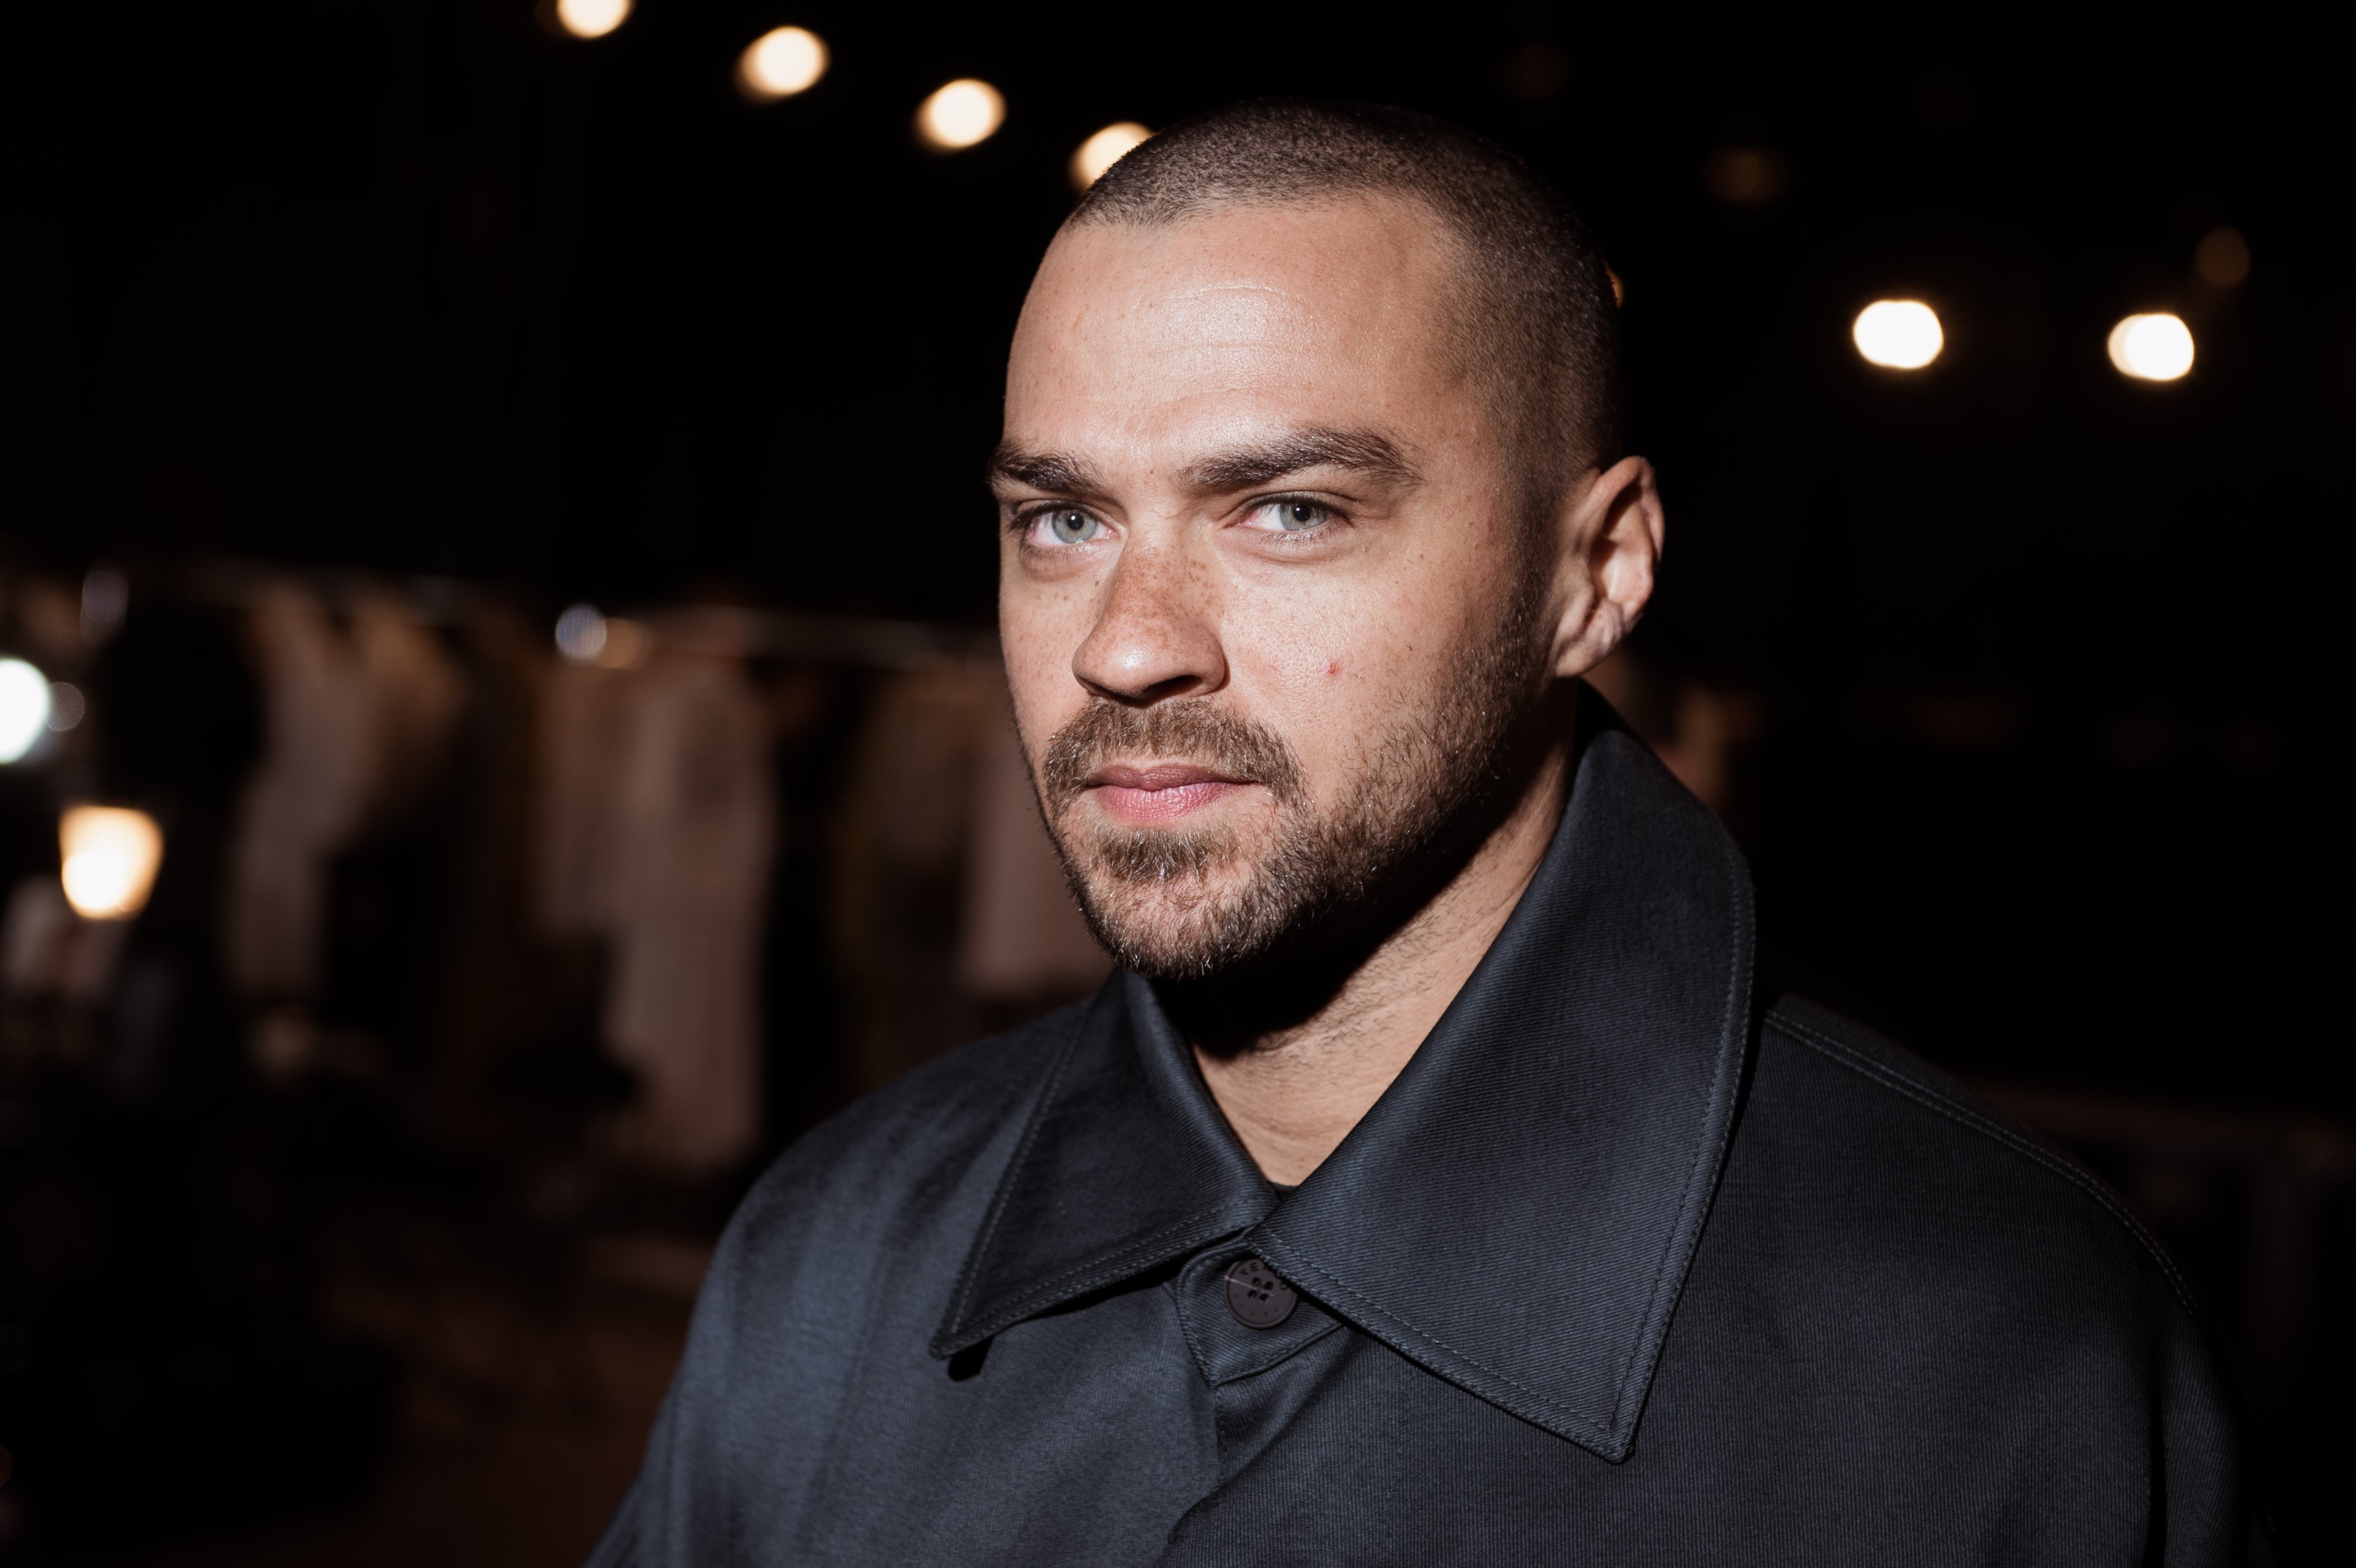 Jesse Williams at a Paris Fashion Week Show in France on Jan. 22, 2017 | Photo: Getty Images